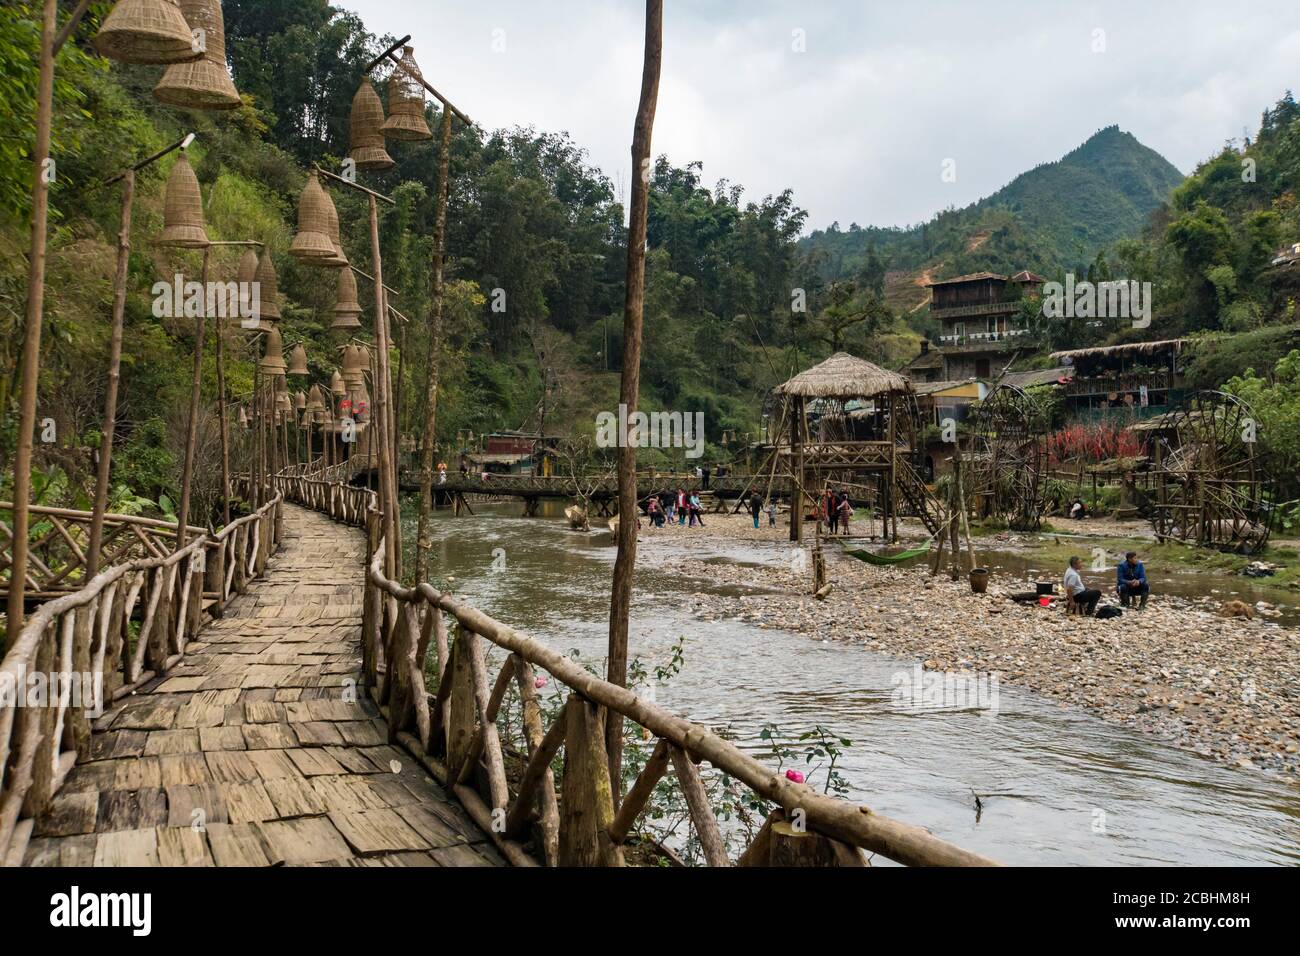 Cat Cat, Vietnam - 11 January 2019: Cat Cat ethnic village landscape with waterfall and tourists exploring the area Stock Photo